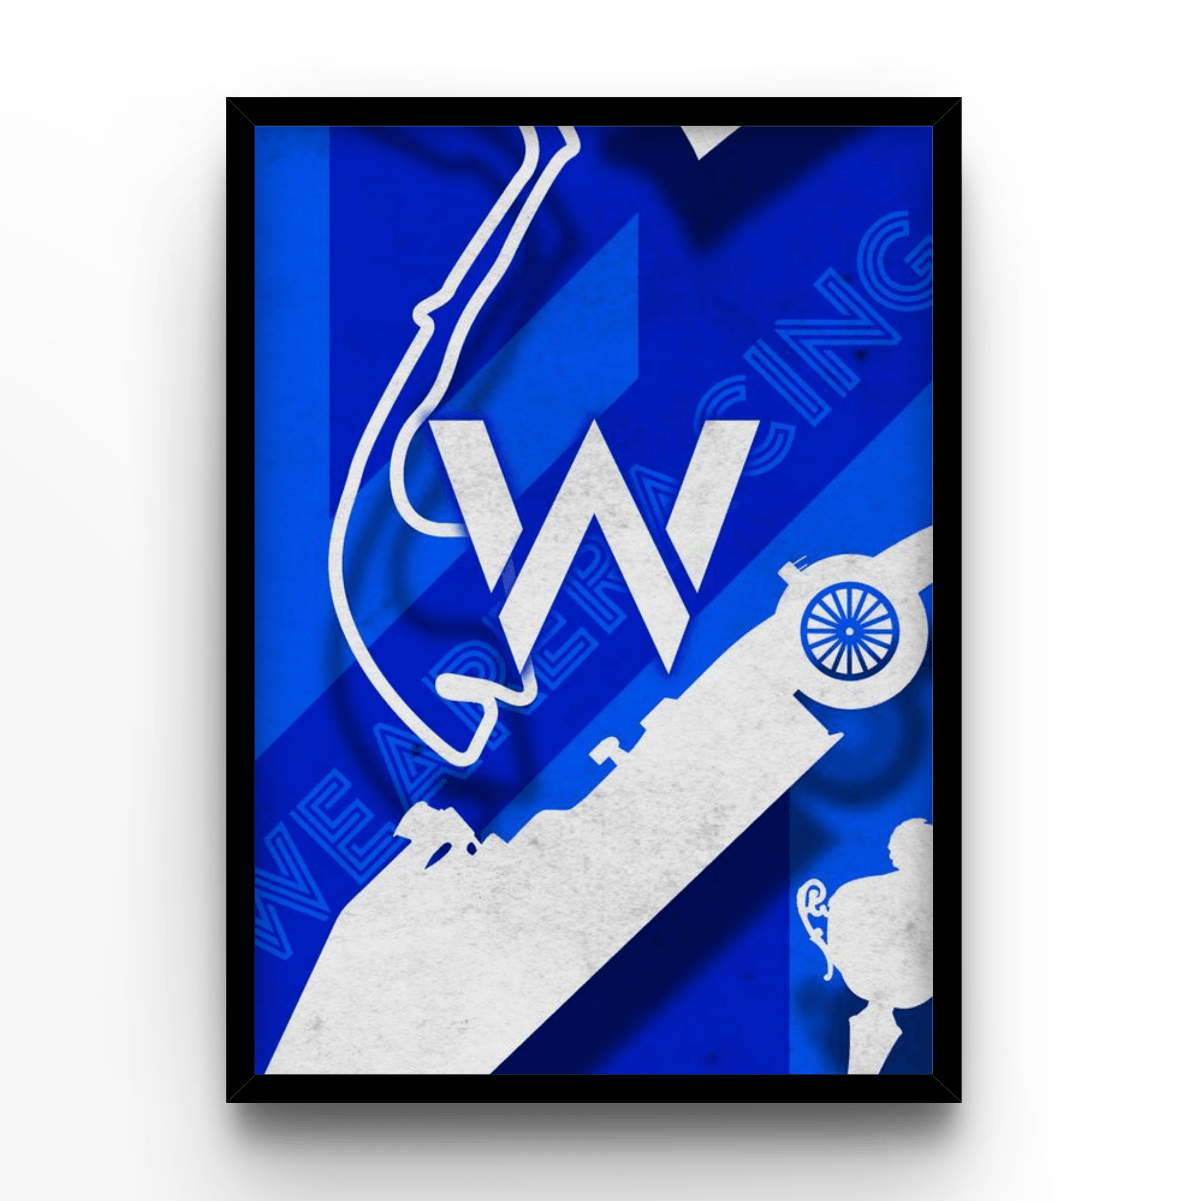 William Racing - A4, A3, A2 Posters Base - Poster Print Shop / Art Prints / PostersBase